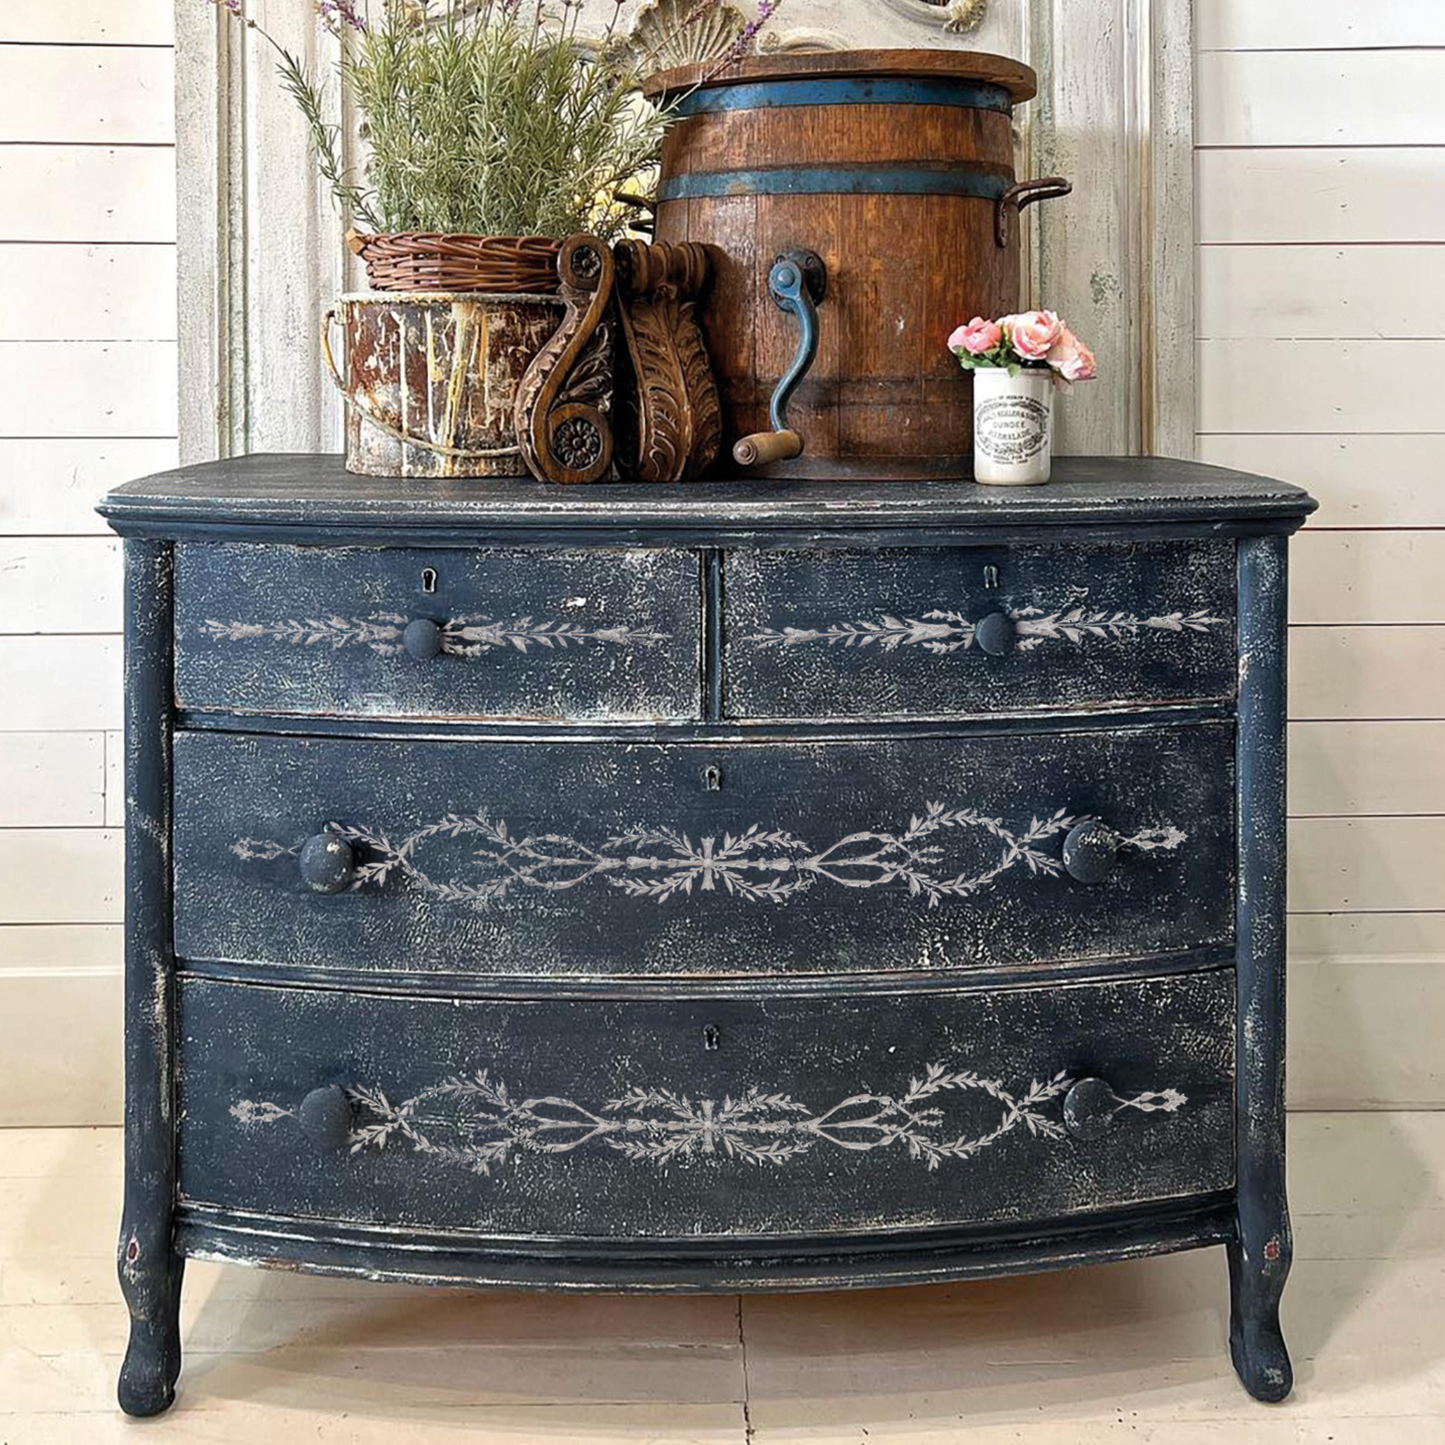 "Trompe L'Oeil Laurel" IOD Paint Inlay Furniture Transfer by Iron Orchid Designs. Example photo #1. Available at Milton's Daughter.